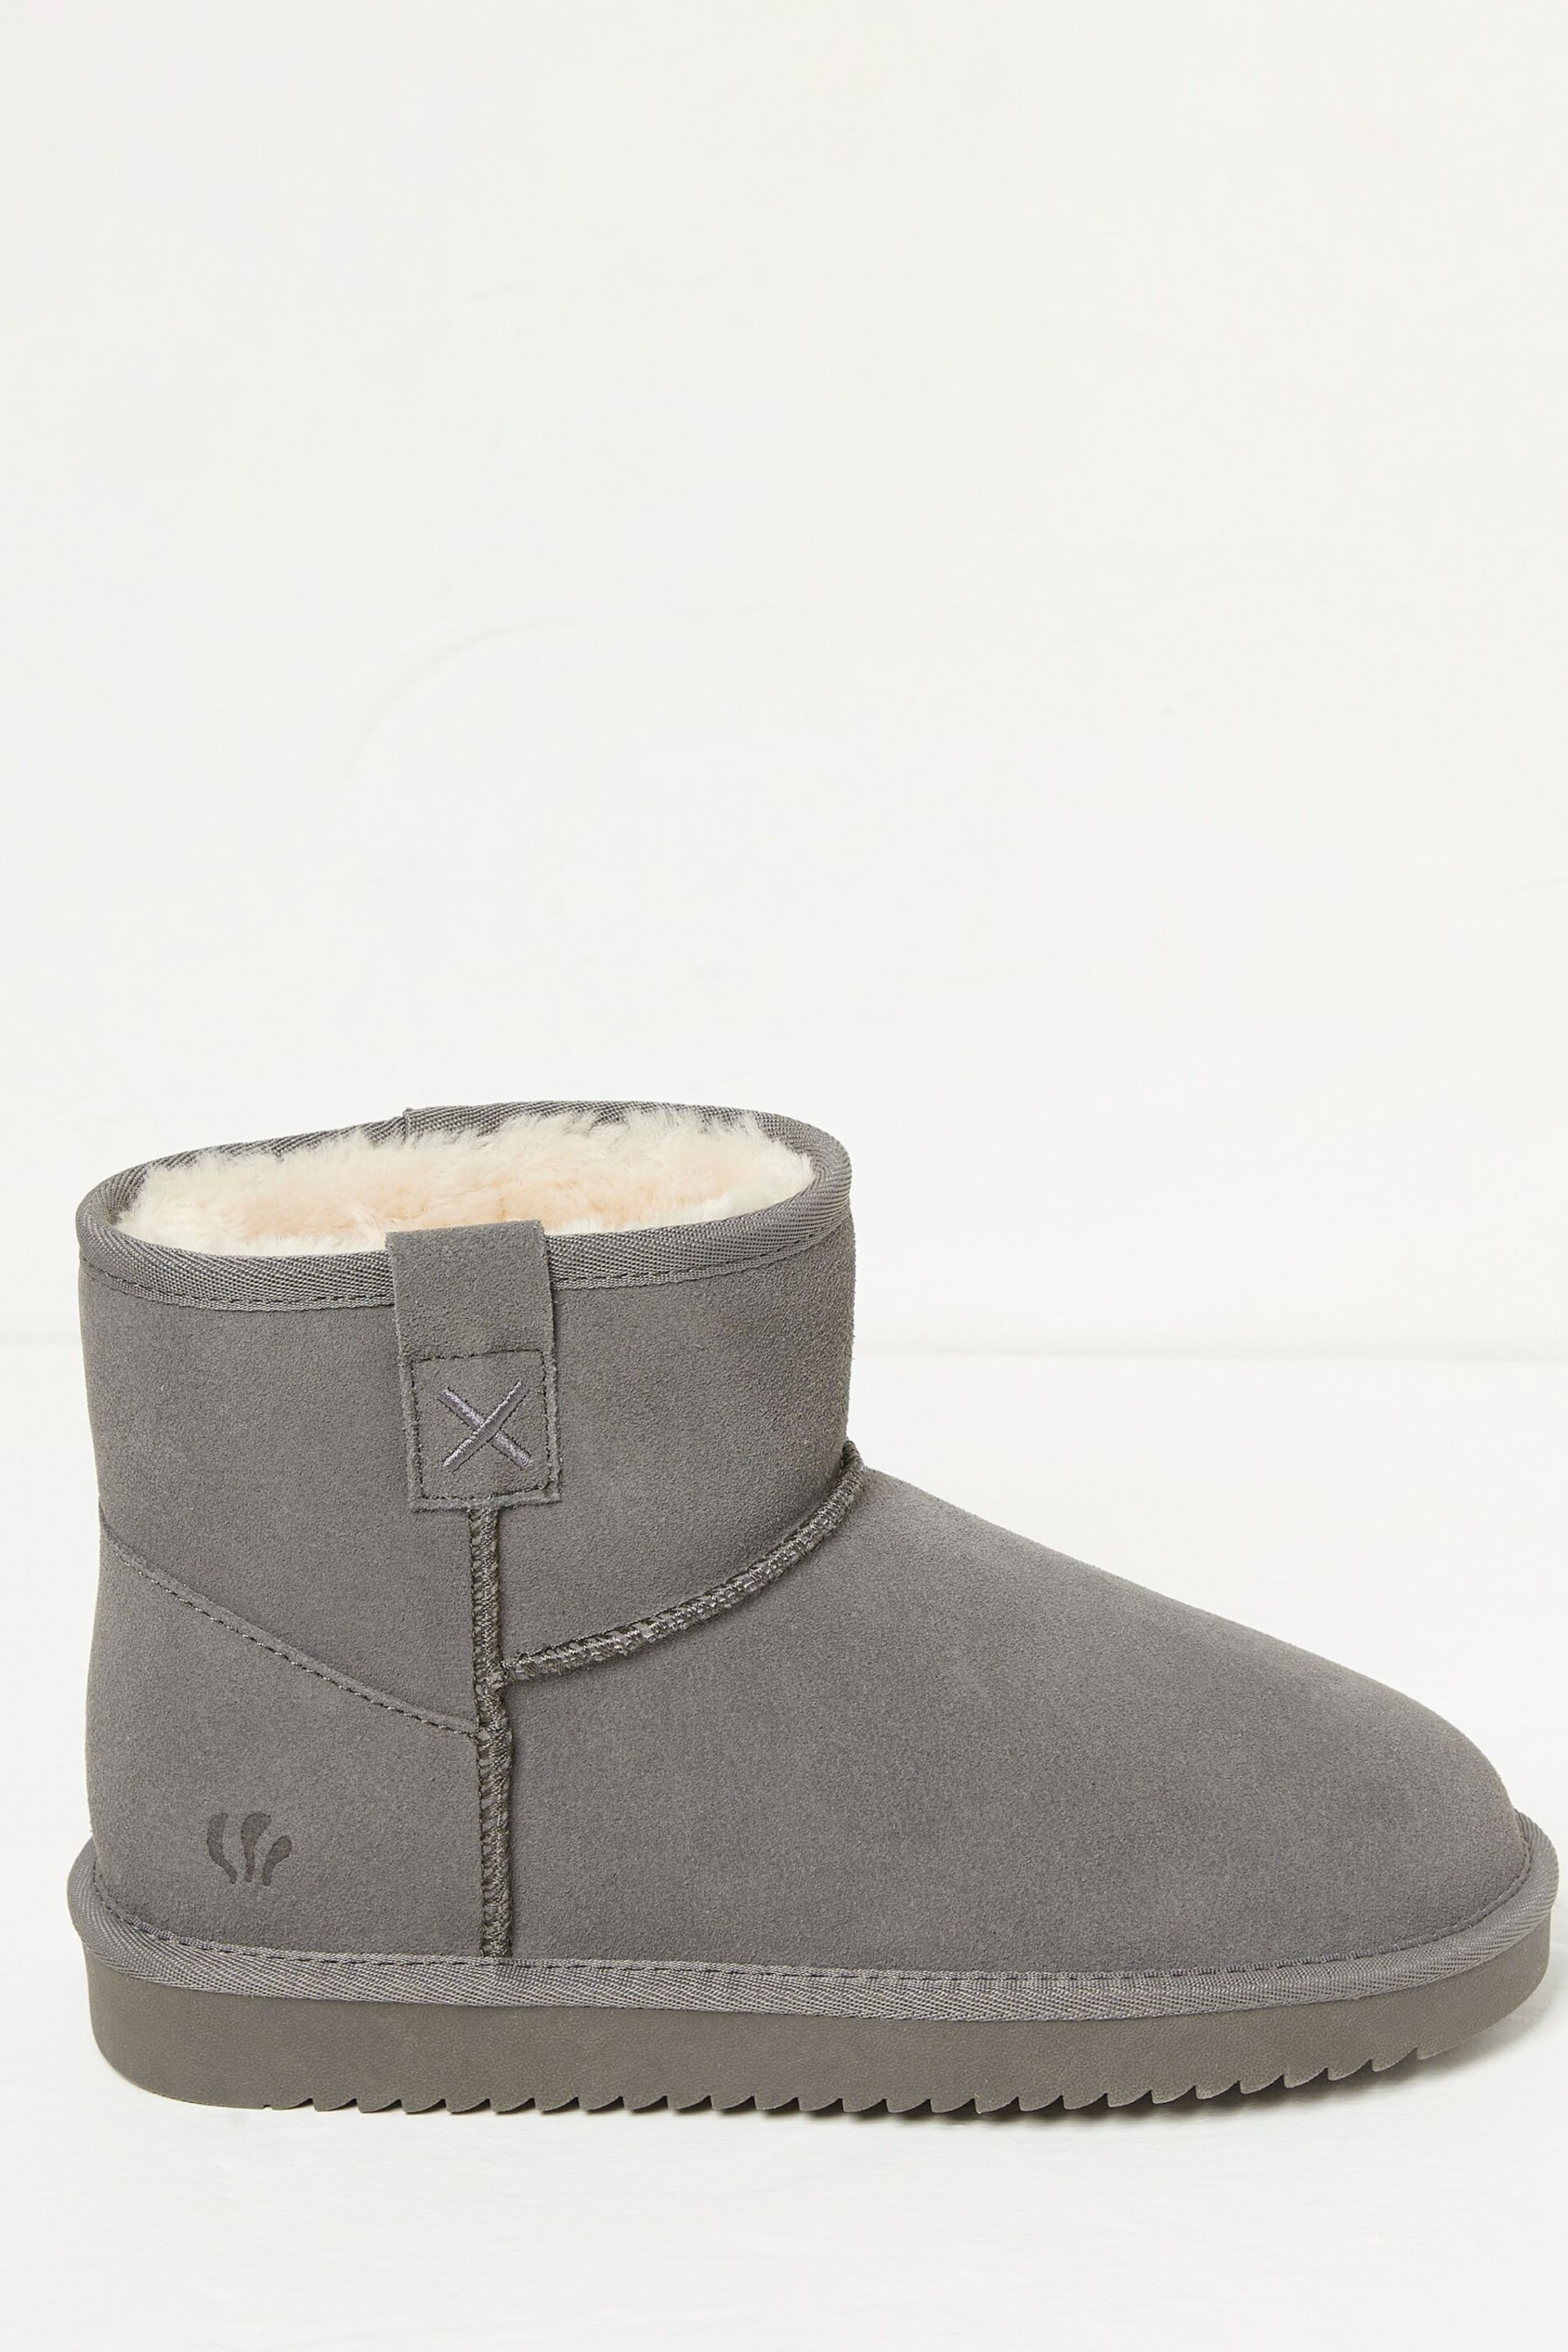 FatFace Grey Suede Slipper Boots - Image 1 of 4